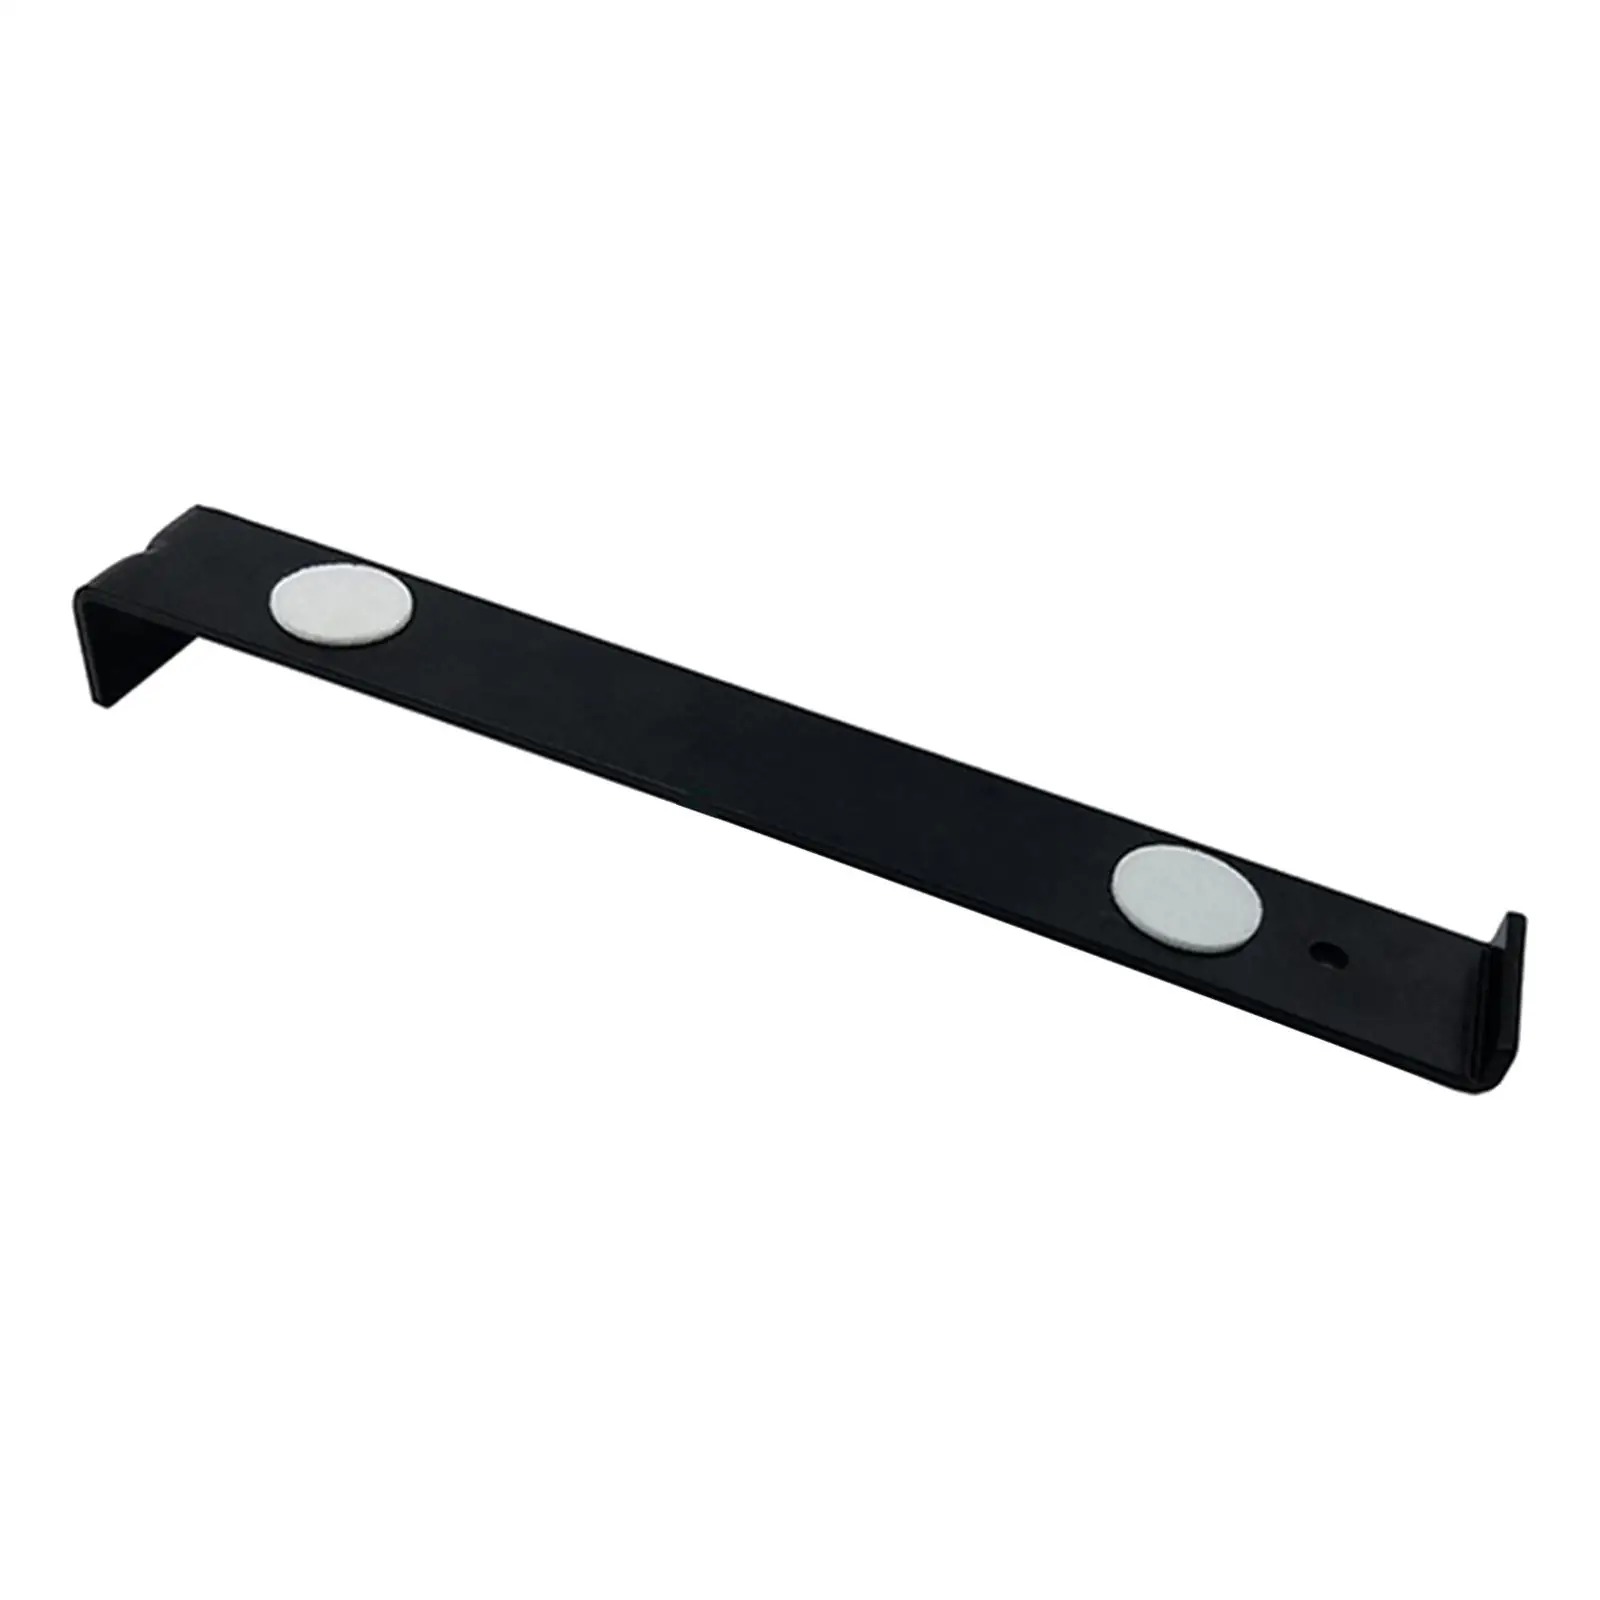 Laminate Tools Long and Wider Pull Bar for Choice for Home and